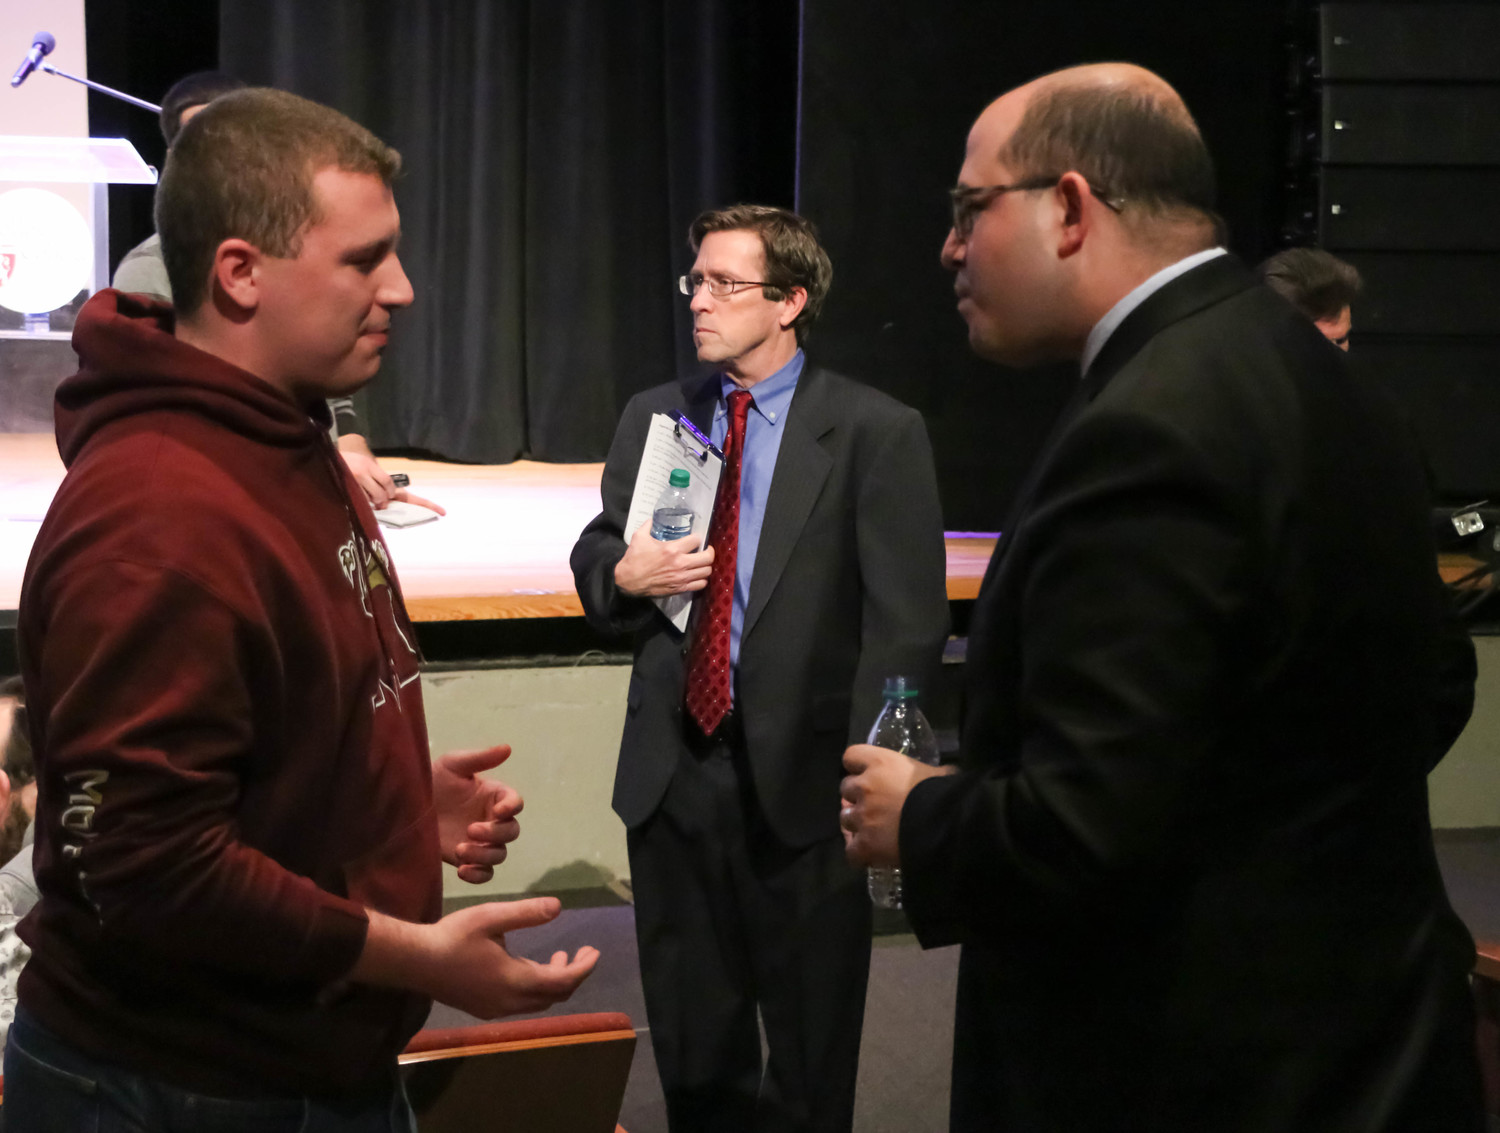 Lou Mazza, left, a freshman at Molloy College, spoke with Stelter after calling him out for having a liberal agenda.